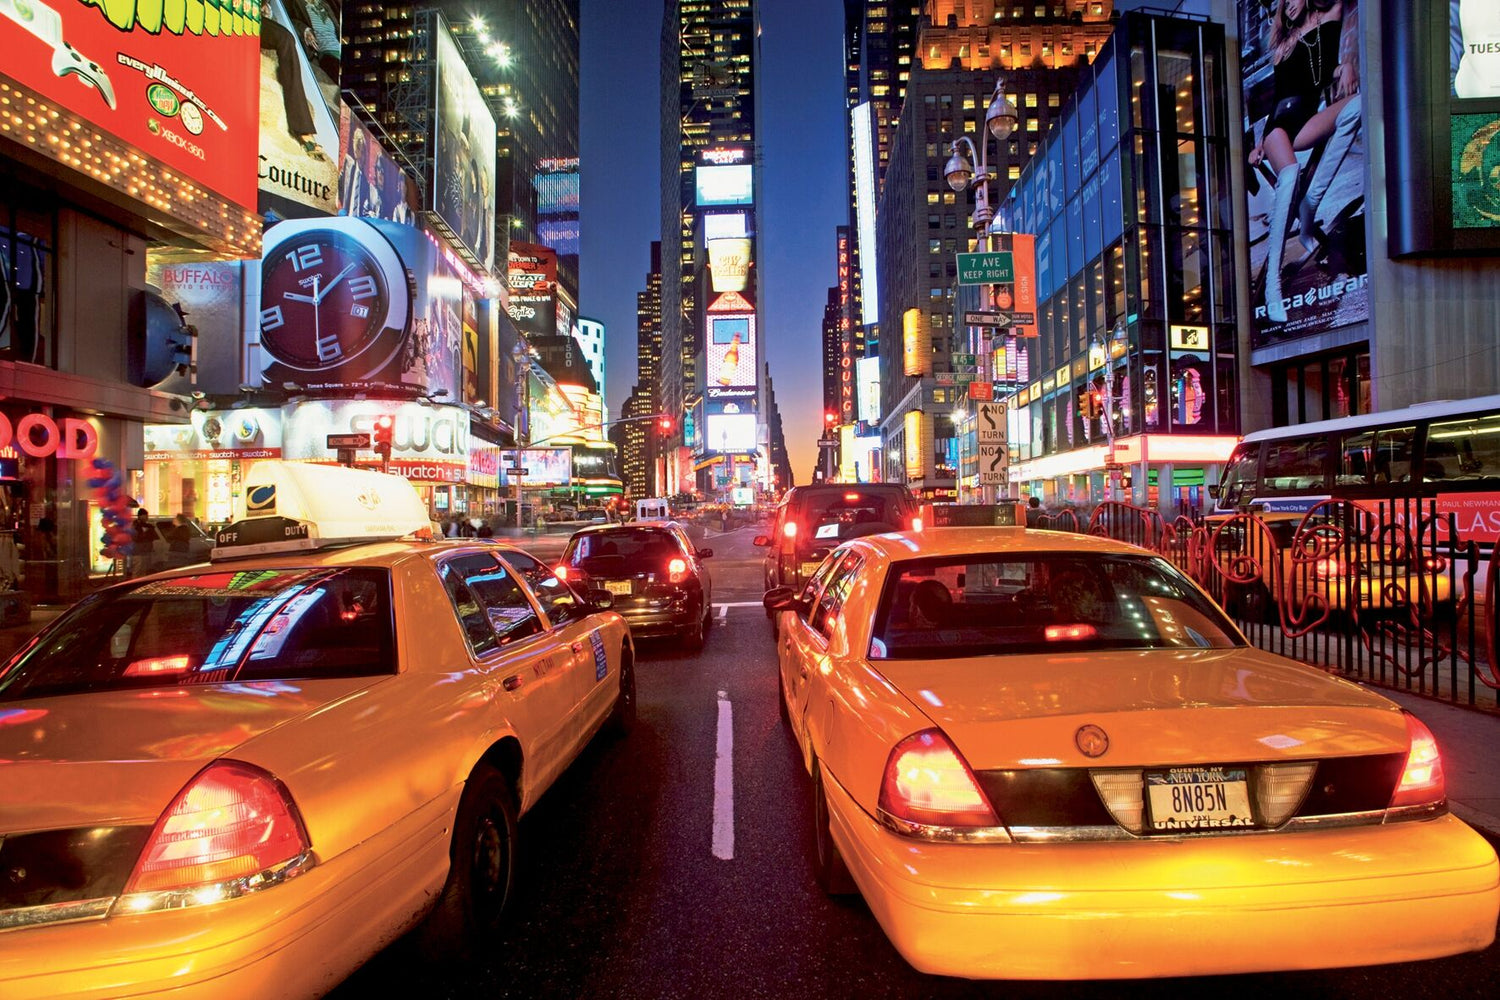 New York Taxi Cabs 3.15m x 2.32m 4 Piece Giant Wallpaper Wall Mural